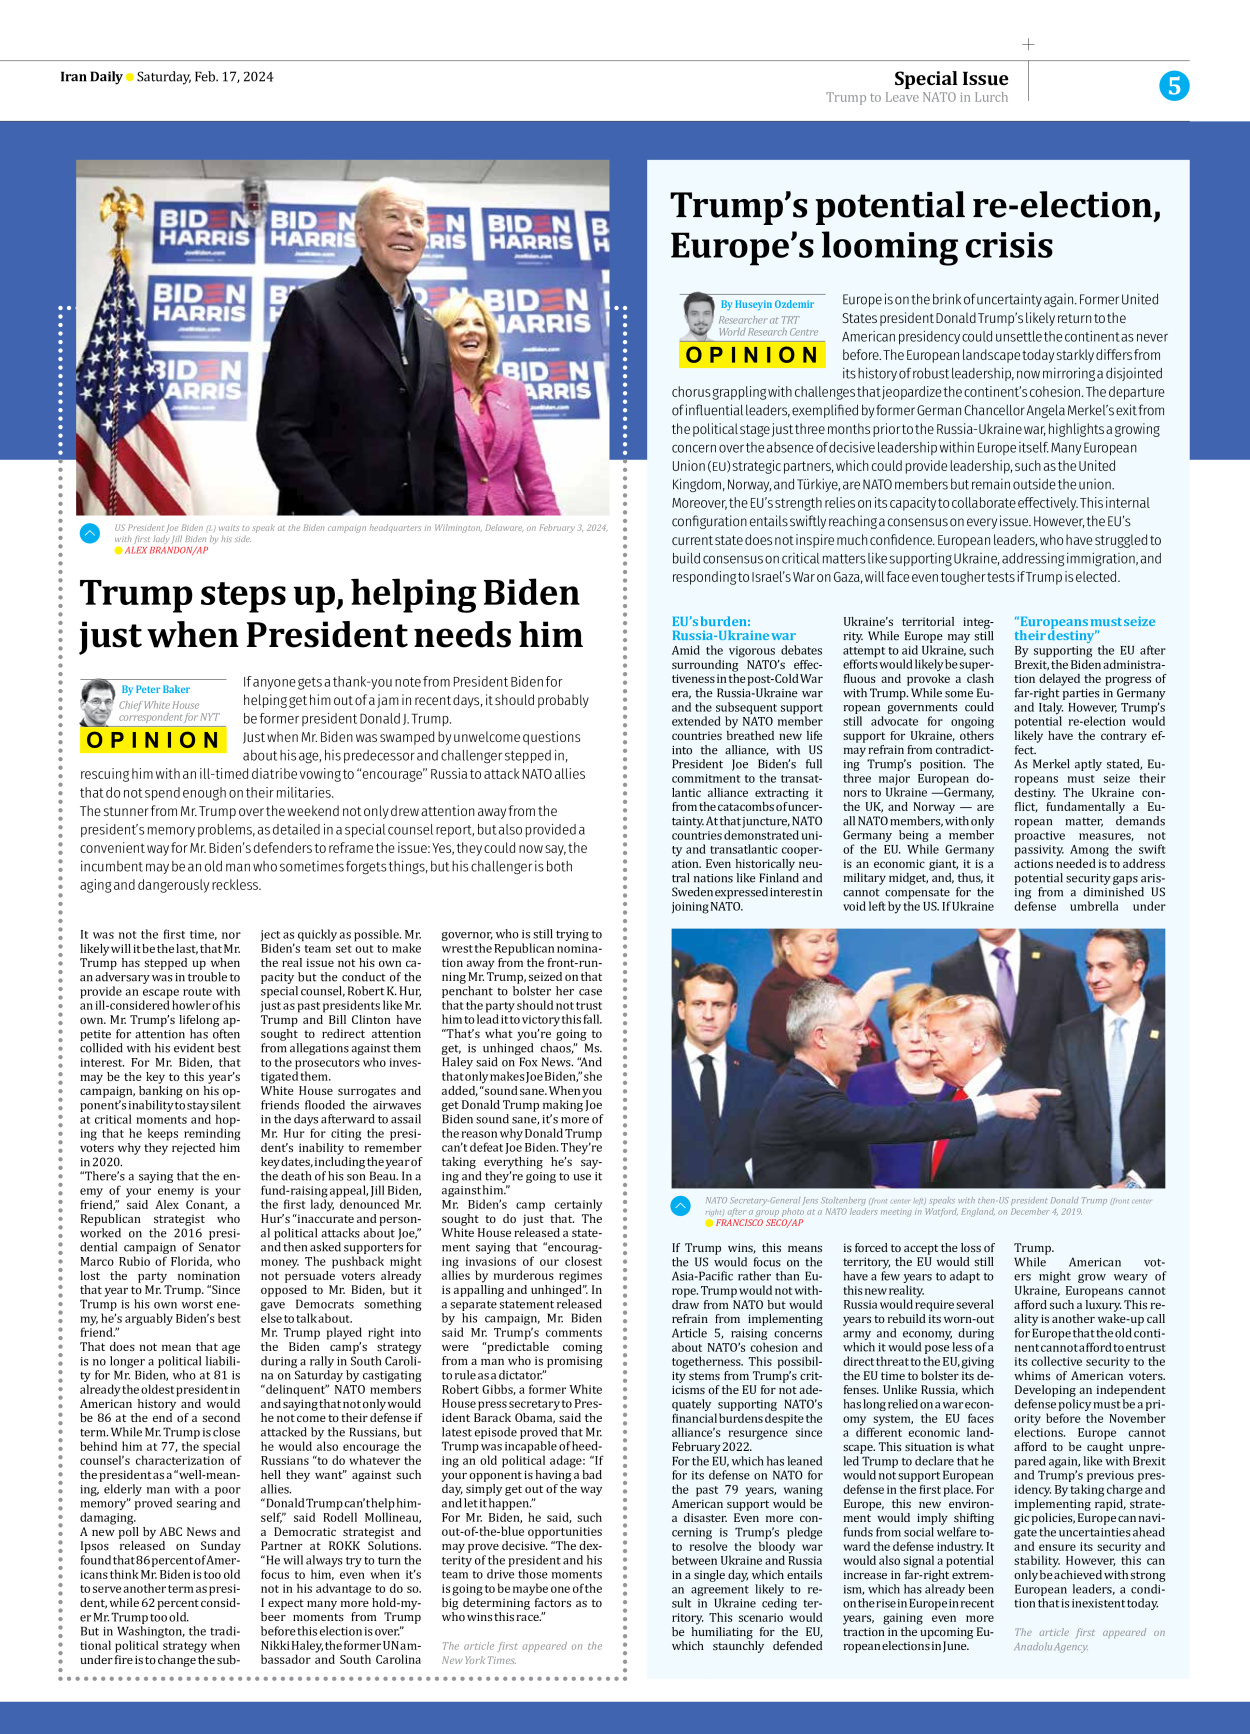 Iran Daily - Number Seven Thousand Five Hundred and Nine - 17 February 2024 - Page 5